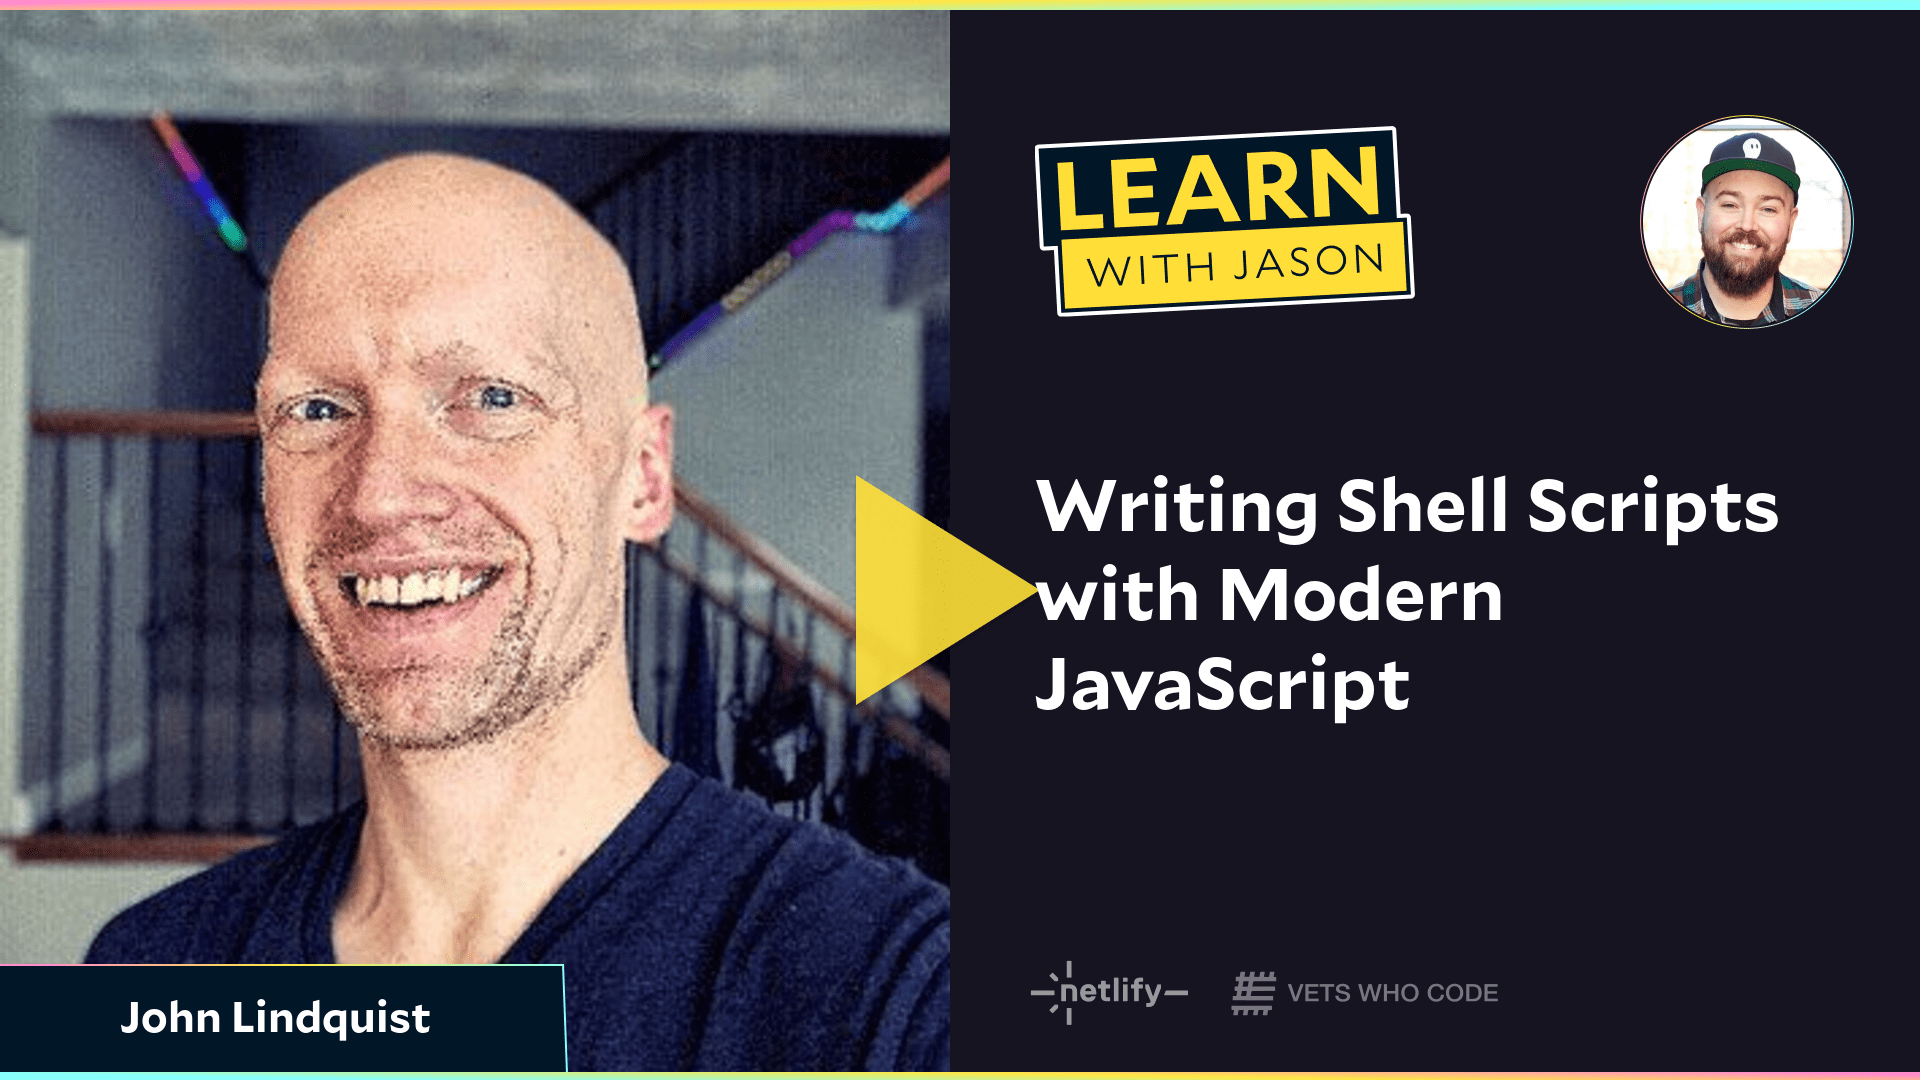 Writing Shell Scripts with Modern JavaScript  (with John Lindquist)